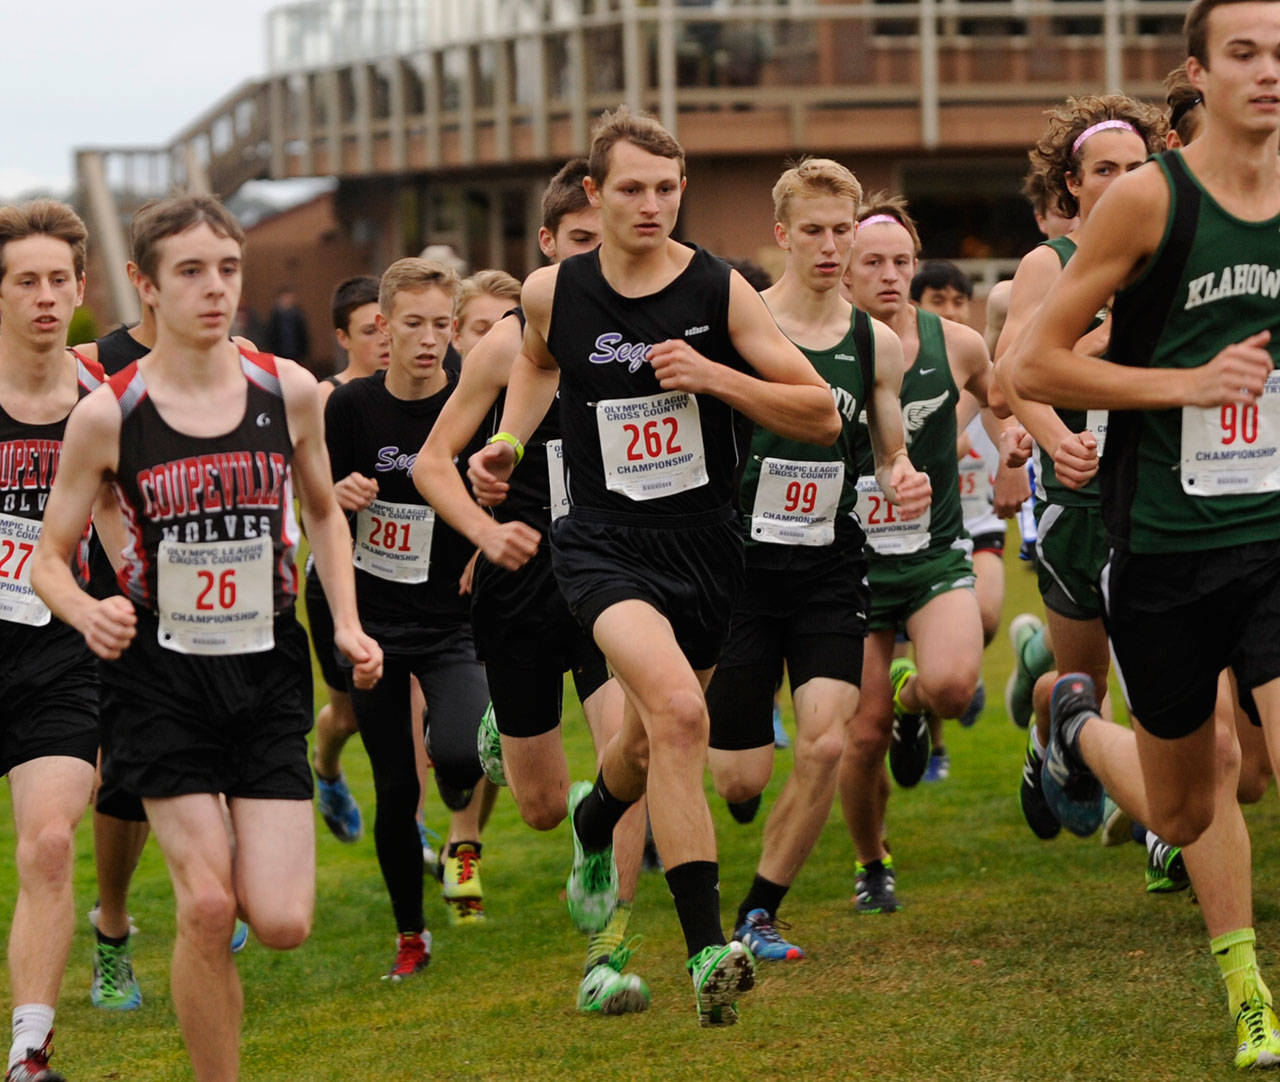 Fall sports preview: Wolves’ cross country hopes high with senior boys, newcomer girls